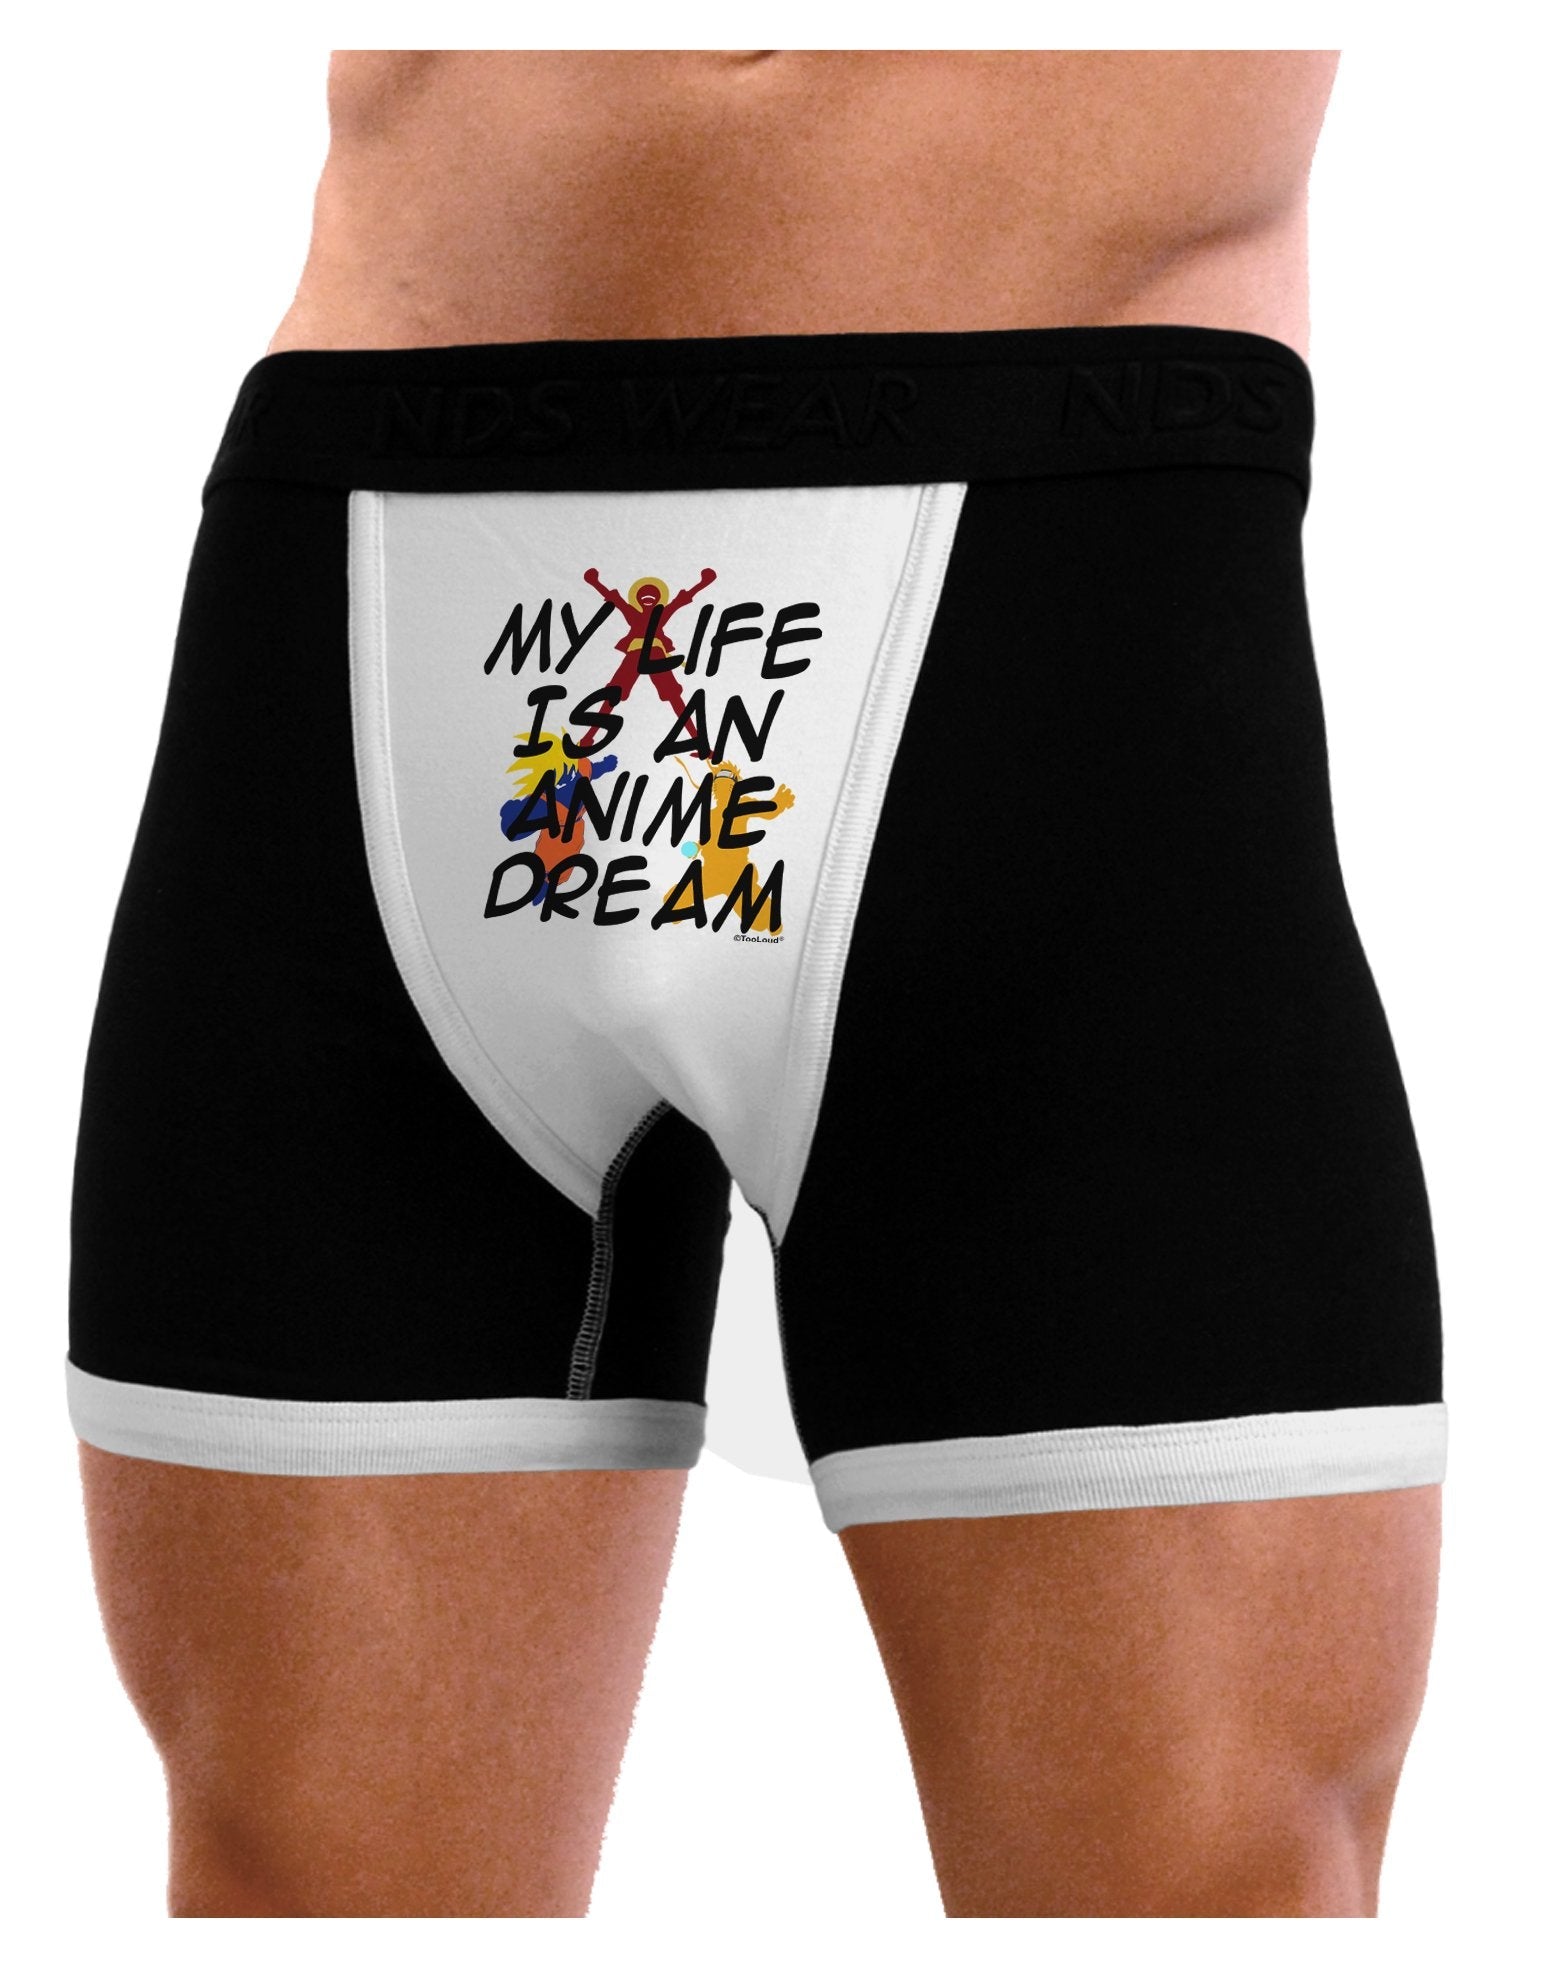 My Life Is An Anime Dream Mens Boxer Brief Underwear by TooLoud - NDS WEAR